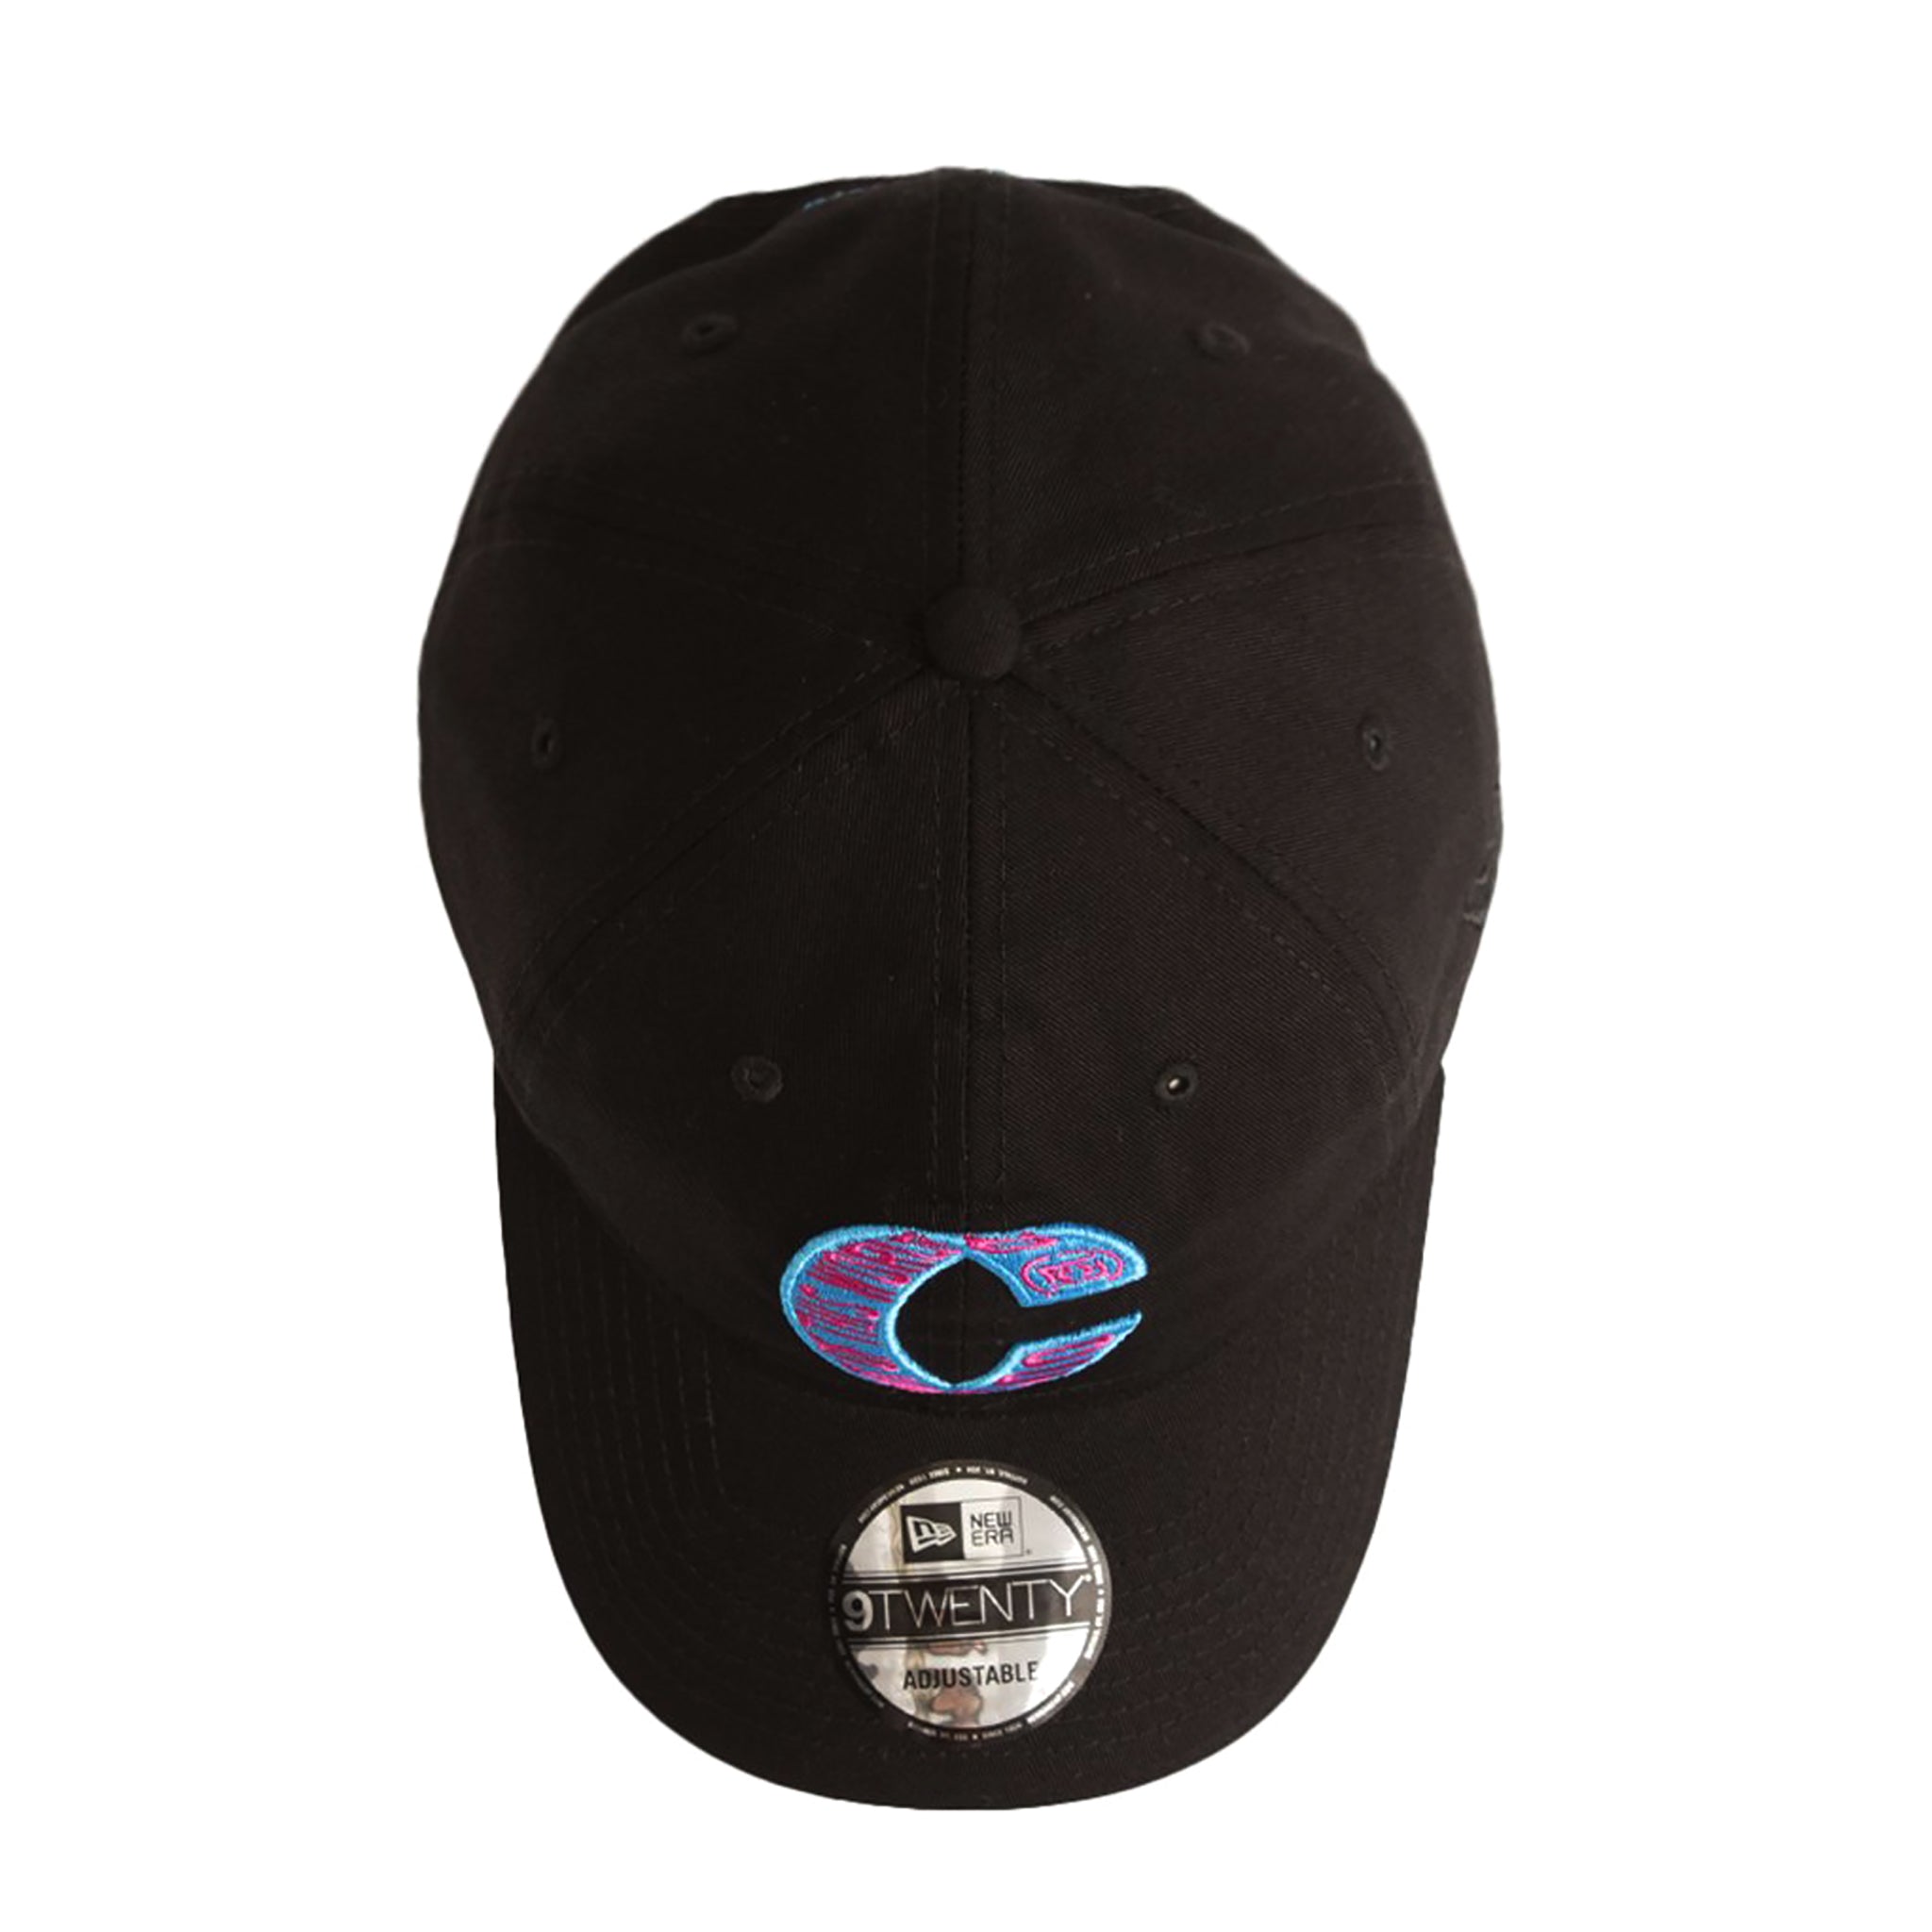 Clot Out Of This World Loop Cap Black